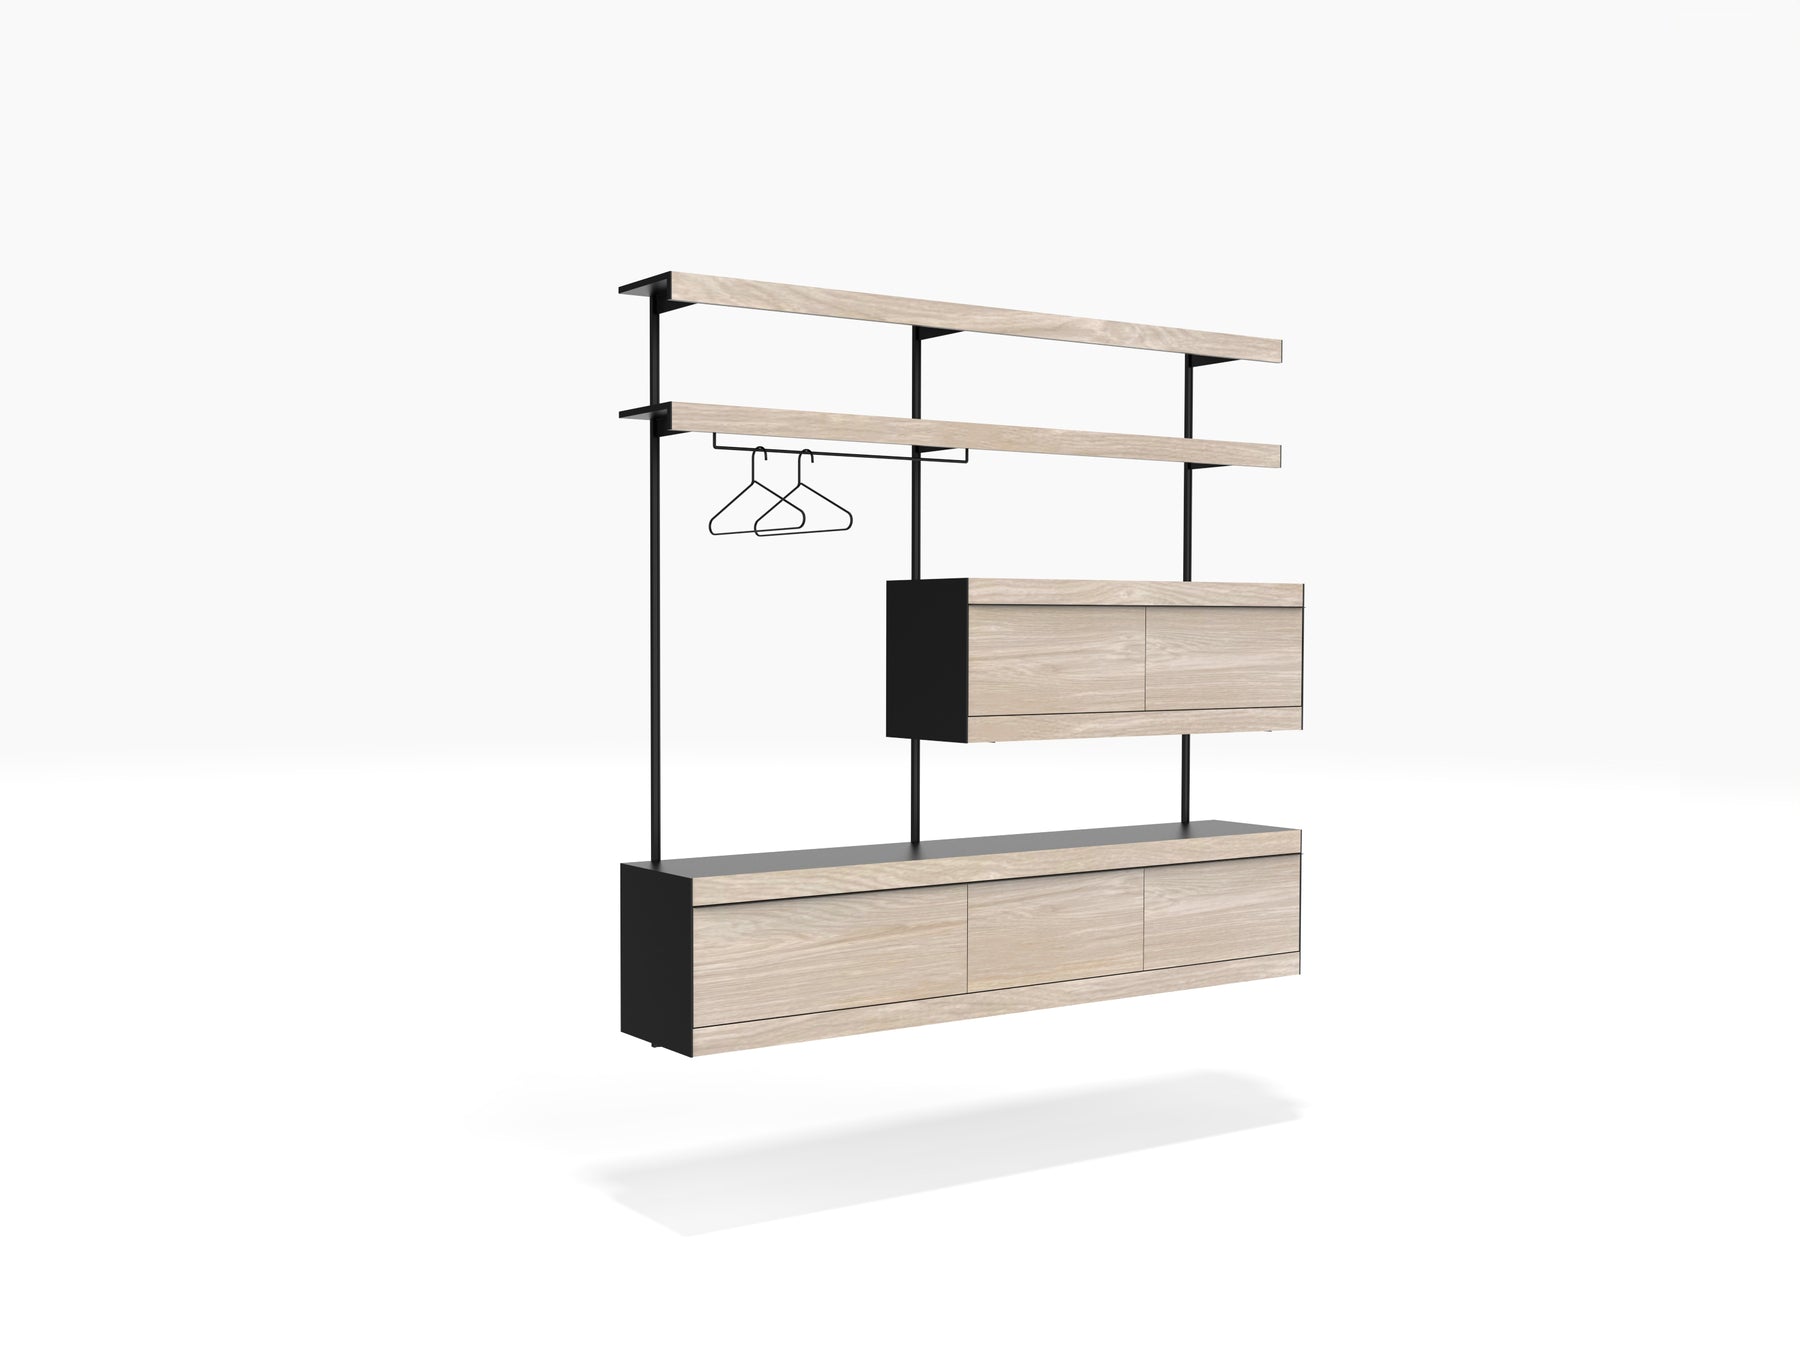 Bedroom wall shelving system with clothes hanger and drawers